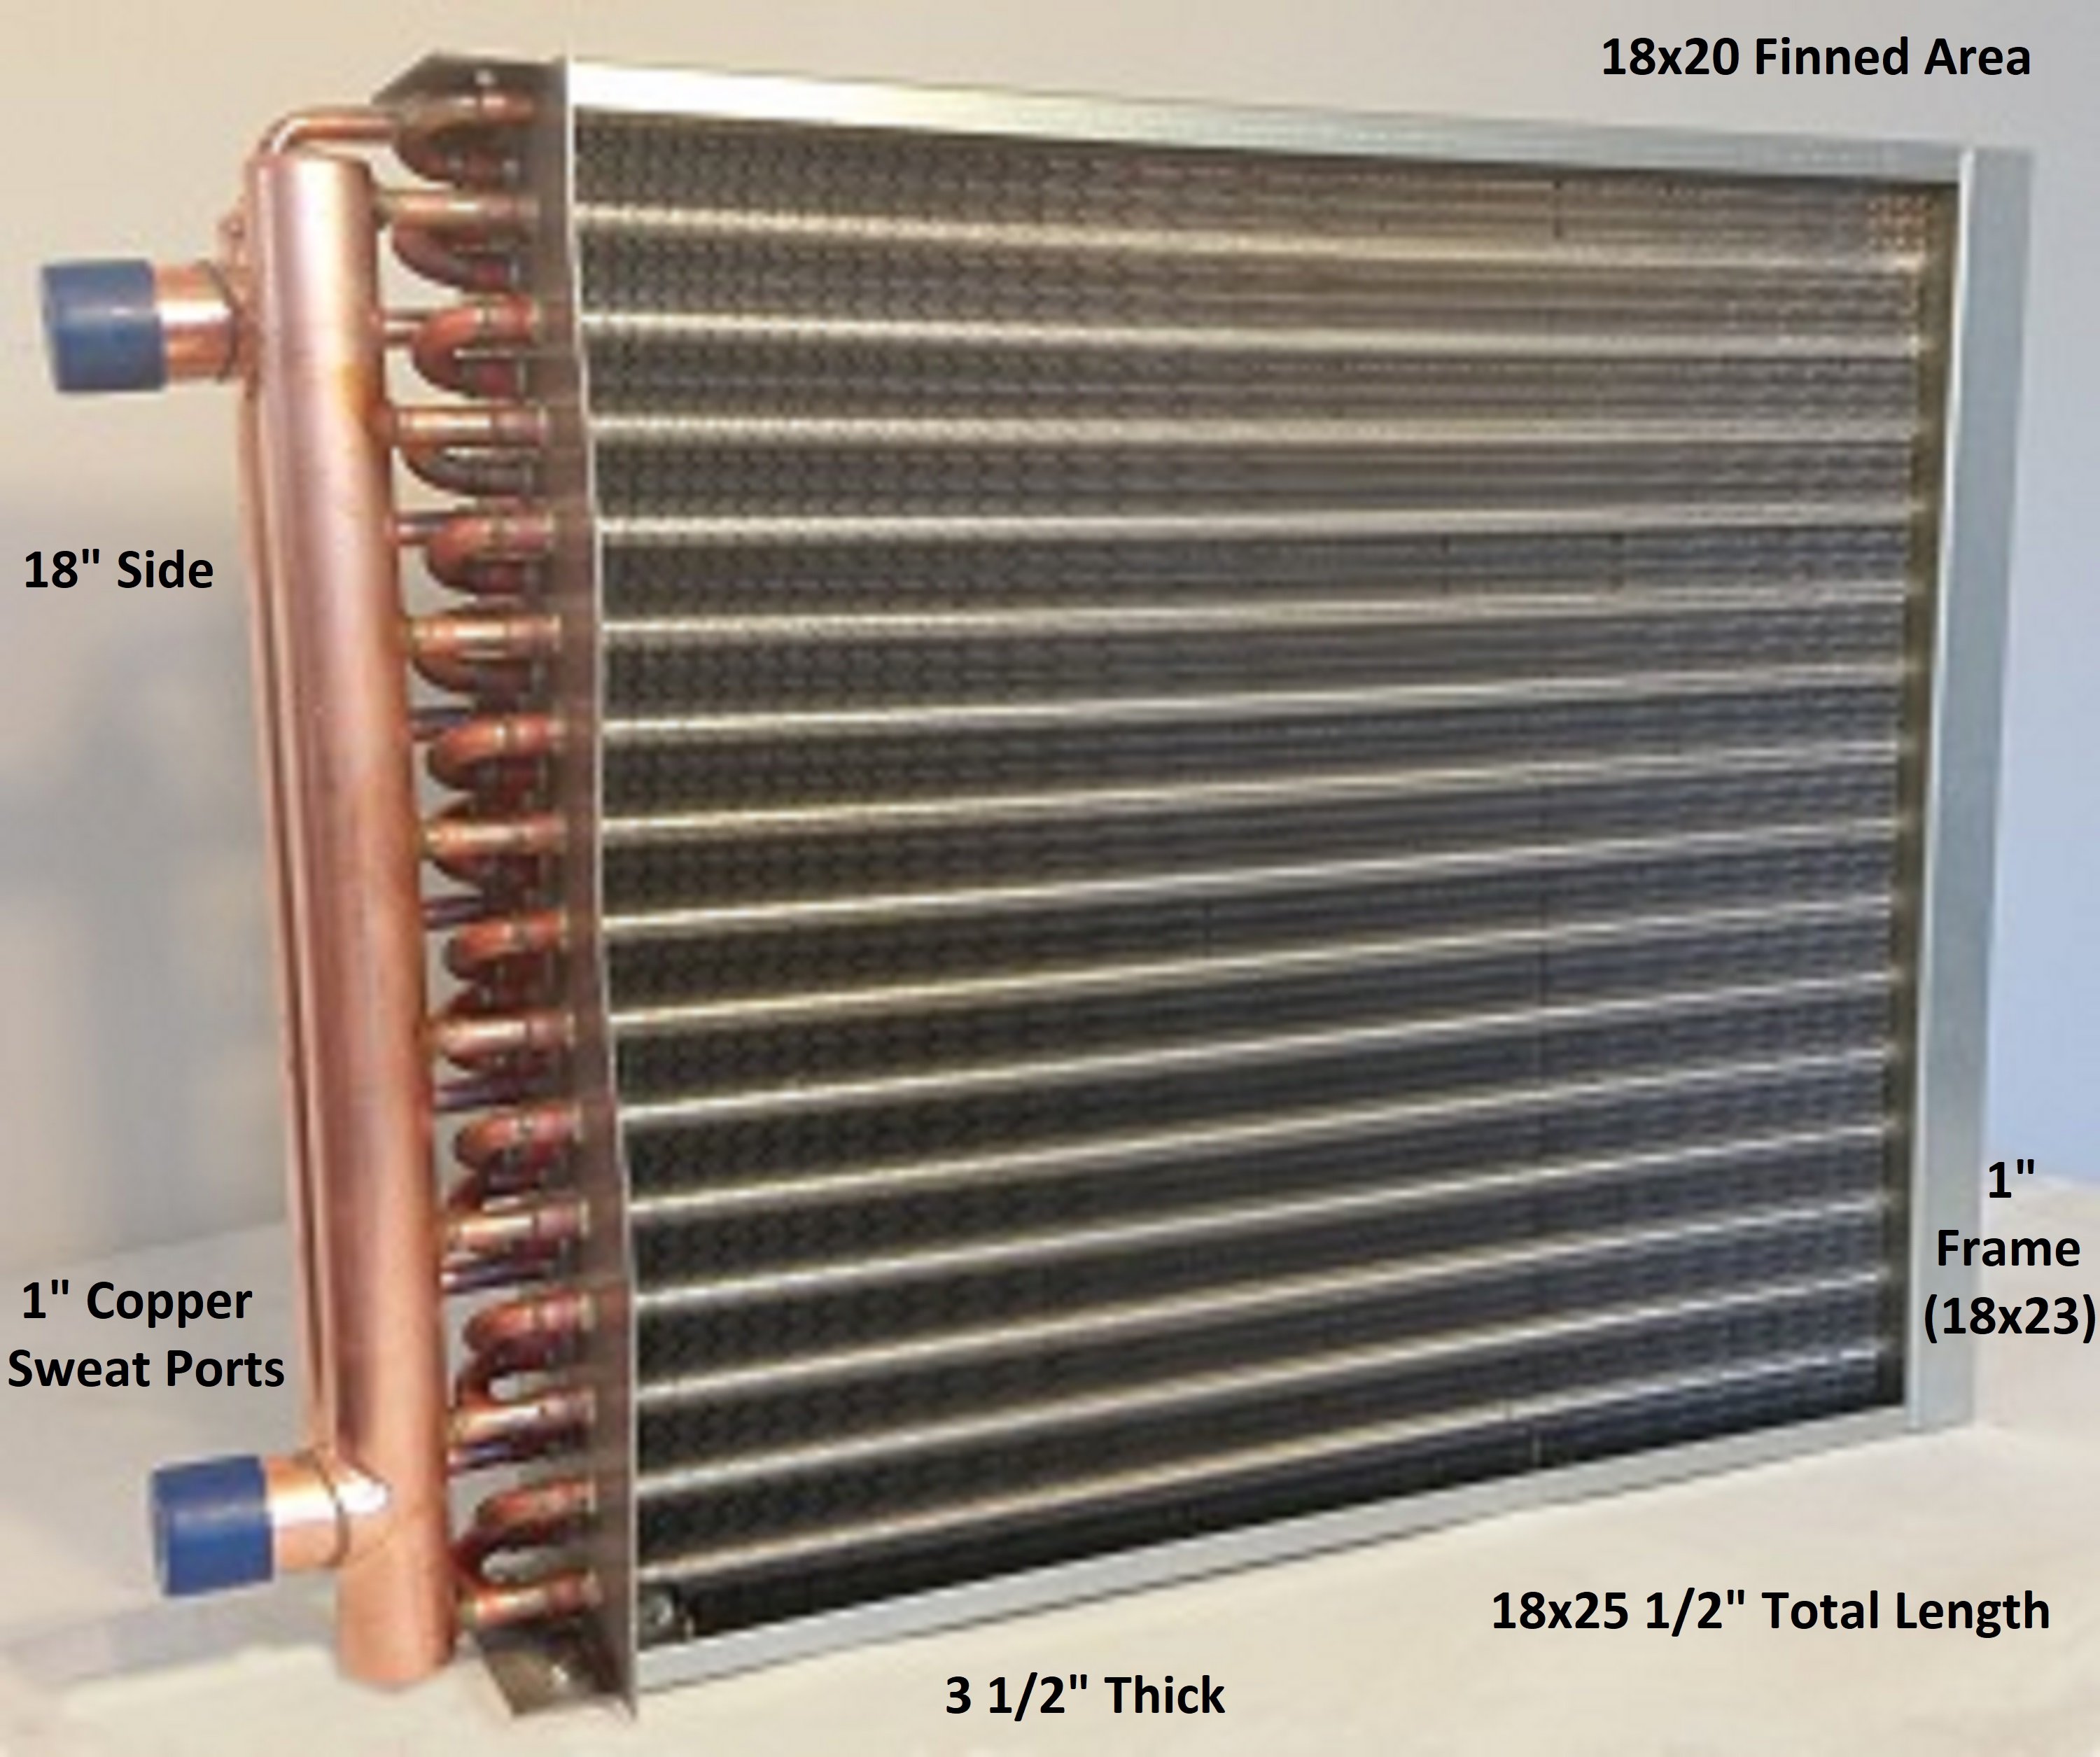 18x22 Water to Air Heat Exchanger 1" Copper Ports with install kit